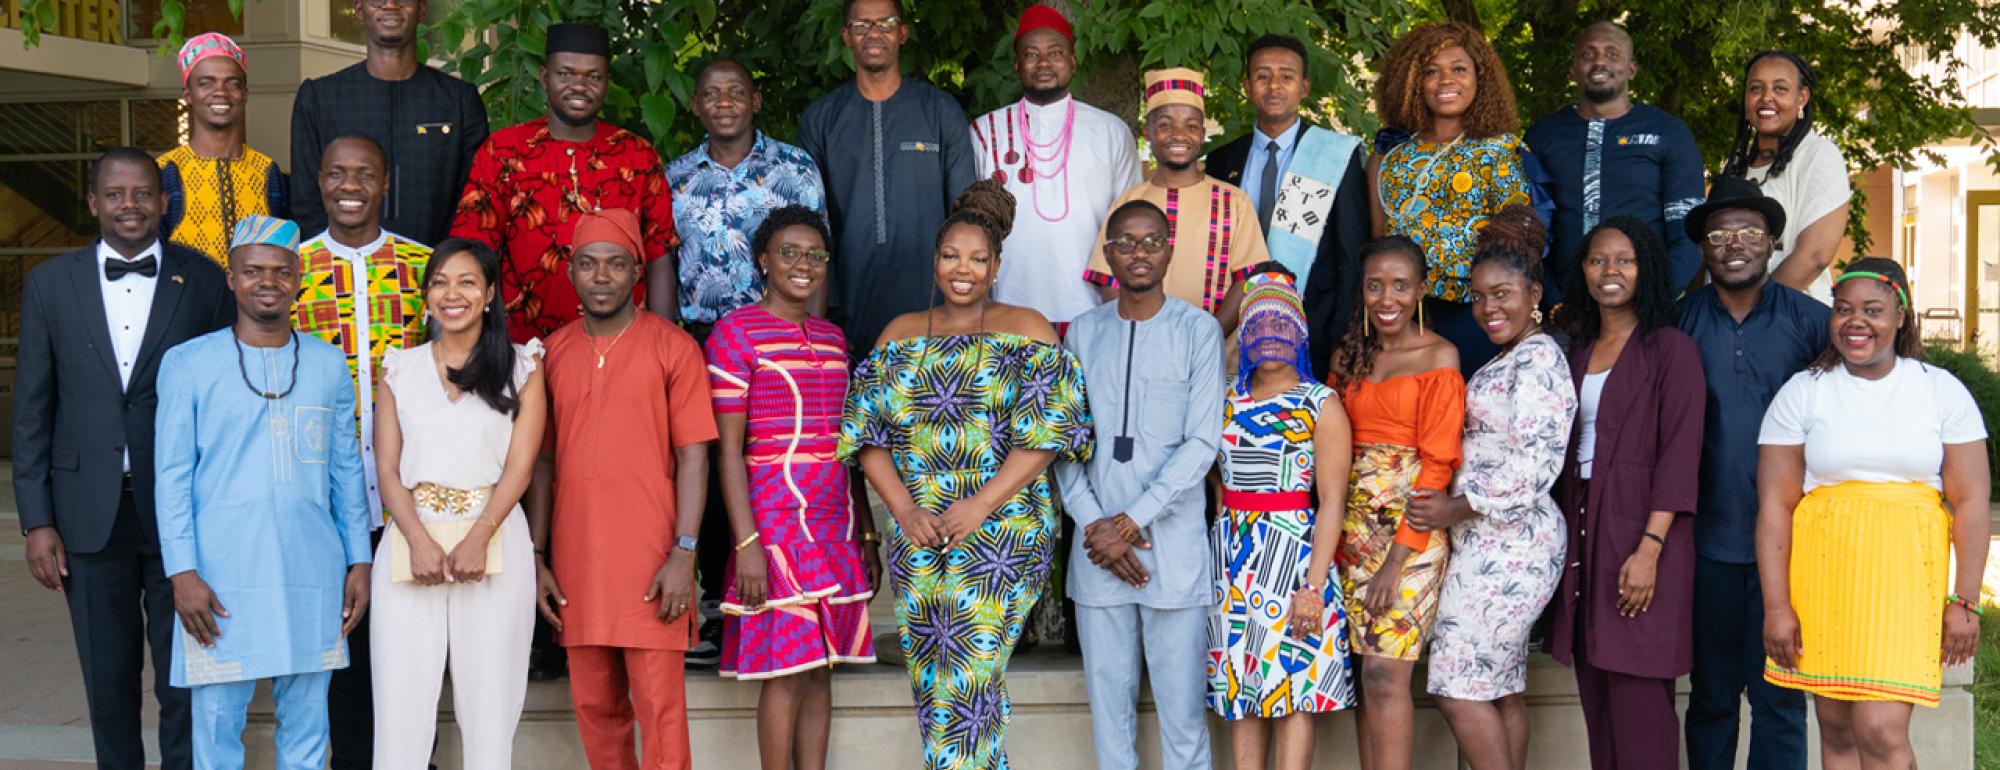 A cohort of 25 Mandela Washington Fellows stands under a large tree outside in colorful traditional attire.